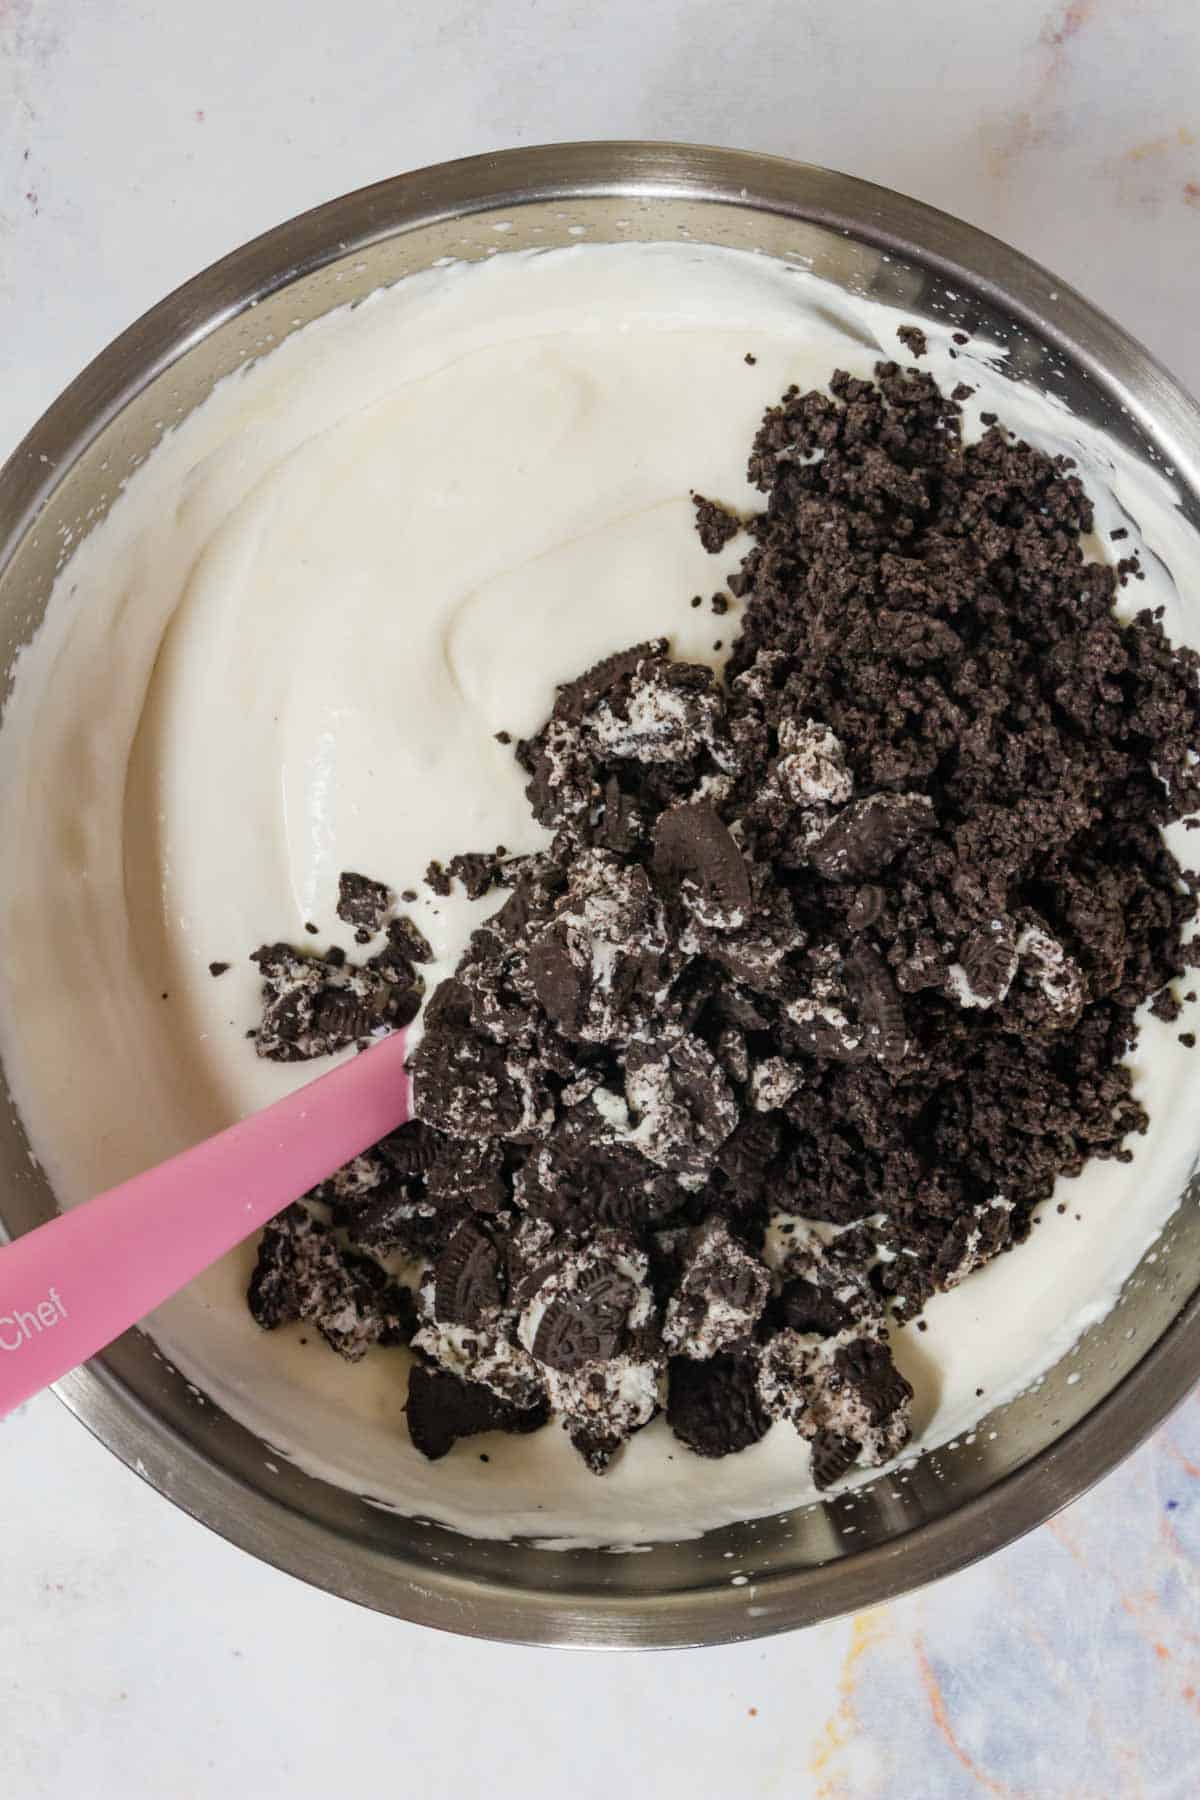 Crushed chocolate sandwich cookies are added into a mixing bowl with the vanilla ice cream base.